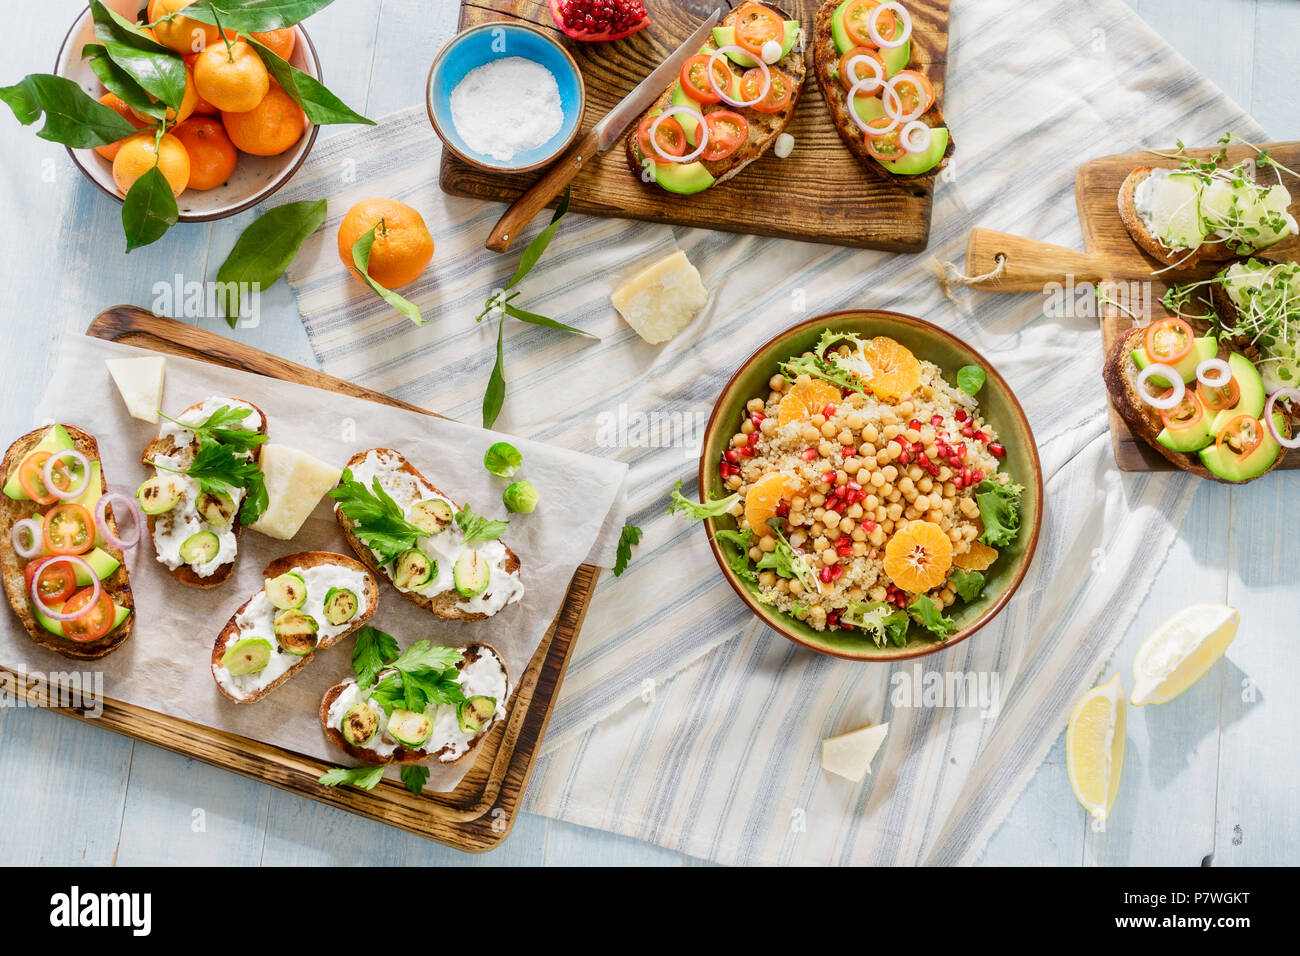 Set of vegetarian dishes on blue wooden table. Bruschetta with tomatoes, cucumbers, Brussels sprouts and salad with chickpeas and quinoa on blue woode Stock Photo